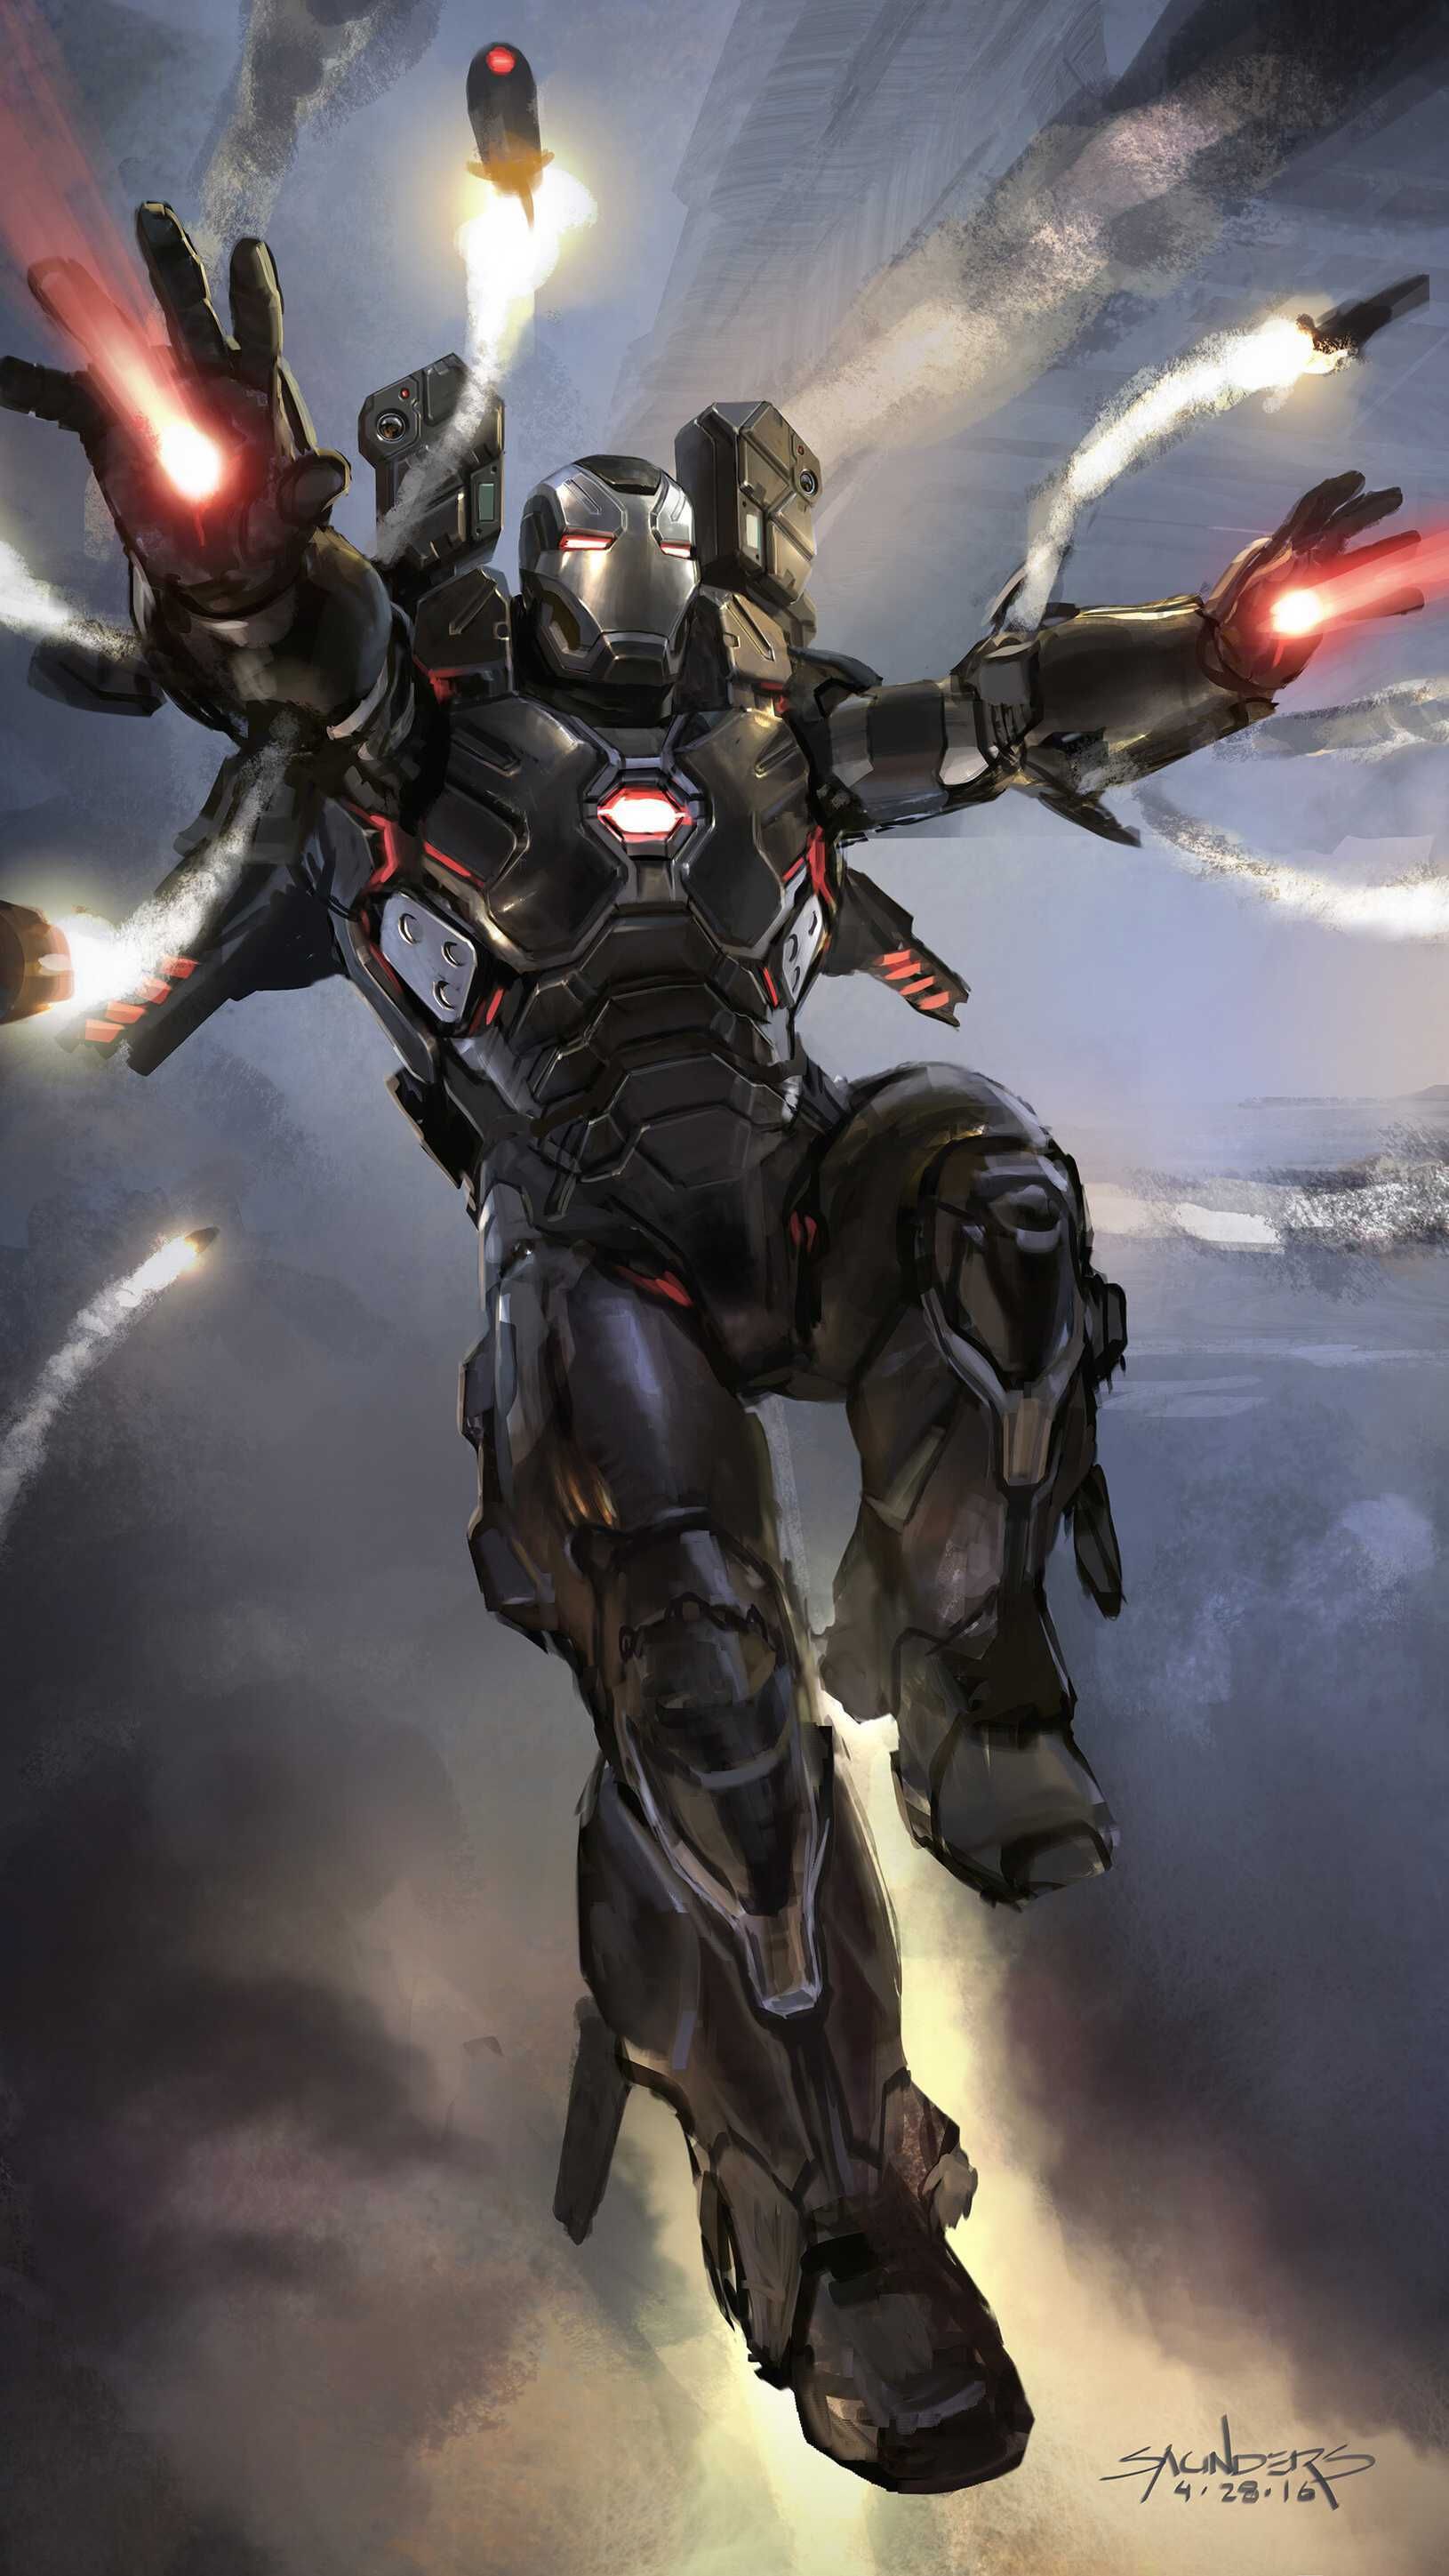 AFTER AVENGERS: ENDGAME, HERE'S THE FUTURE OF MARVEL CINEMATIC UNIVERSE. #blackpanther #blackwido. Marvel comics wallpaper, Marvel superhero posters, War machine